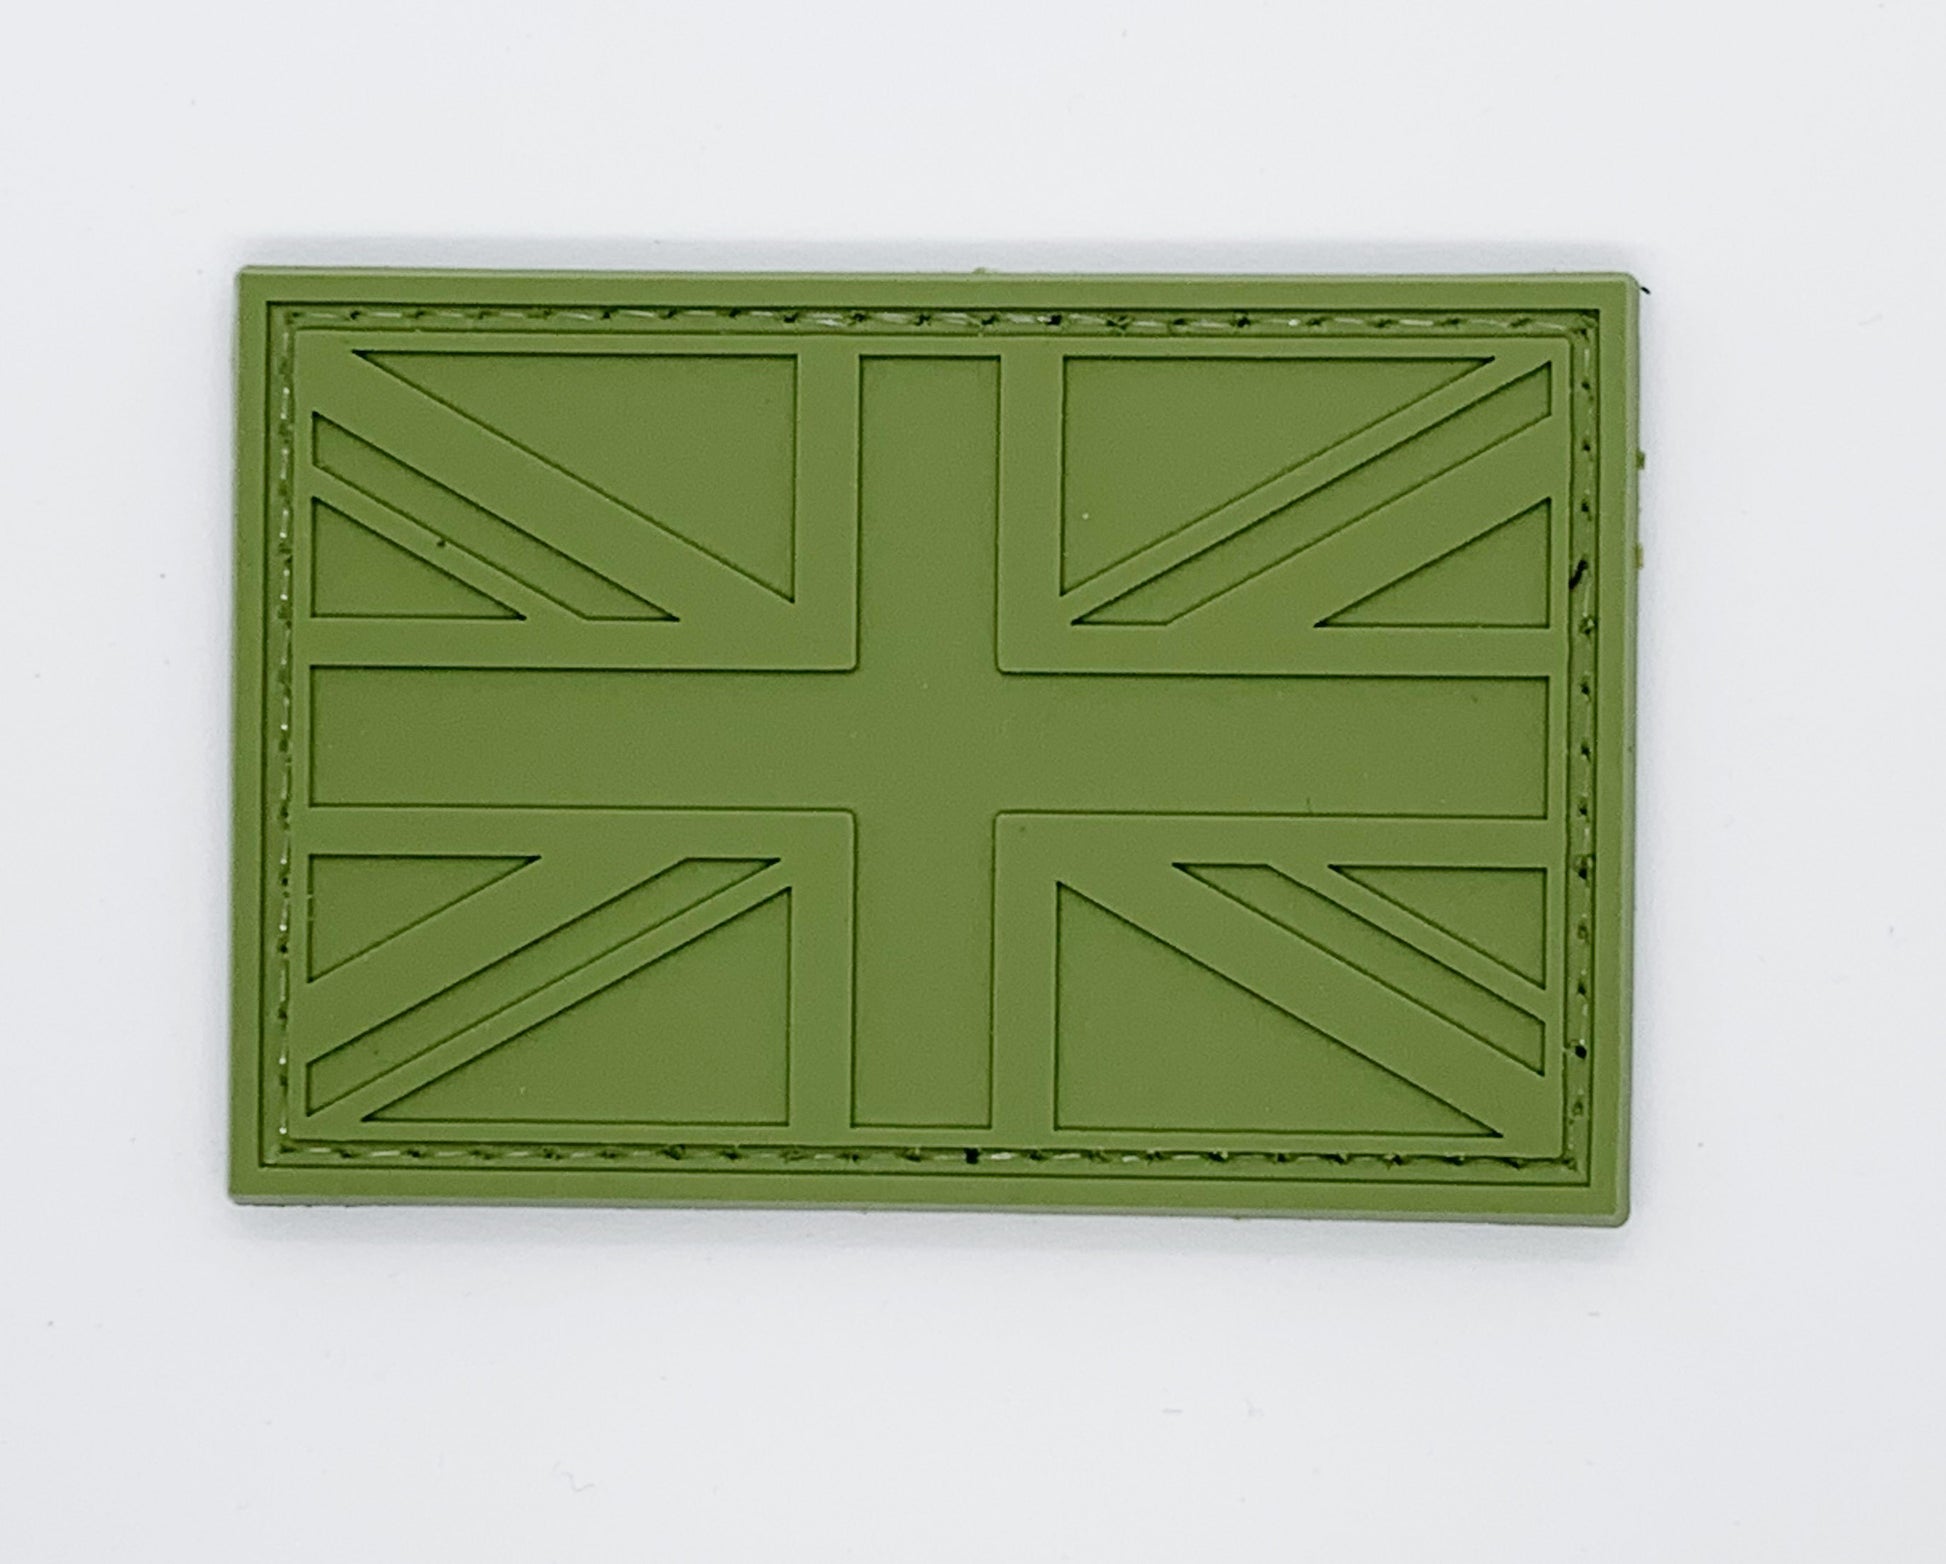  UK Flag with Carved Version PVC Patch All OD Green, Velcro backed Badge. Great for attaching to your field gear, jackets, shirts, pants, jeans, hats or even create your own patch board.  Size: 7.5x5cm